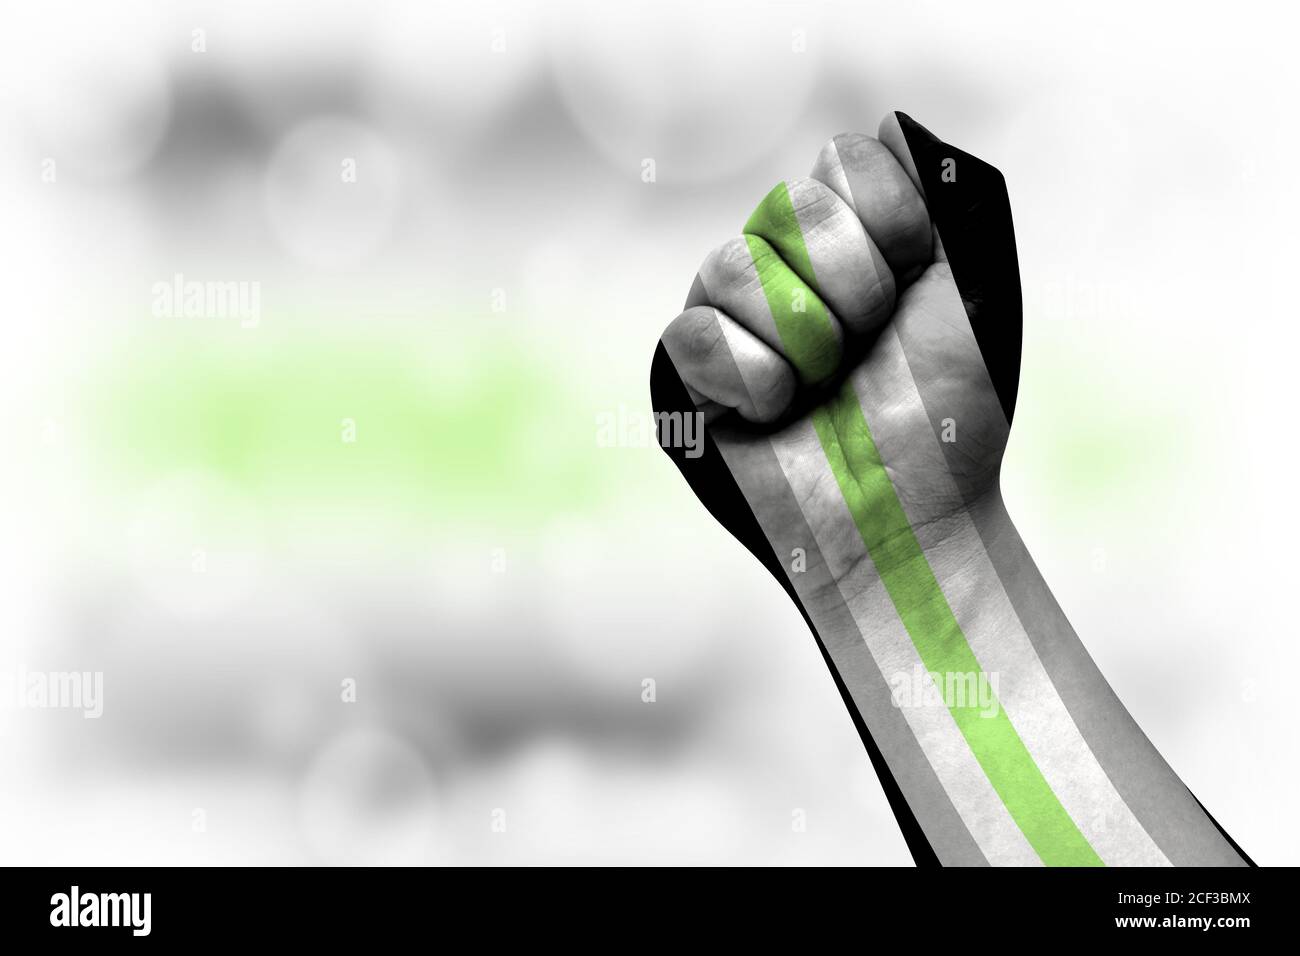 Flag Of Agender Pride Painted On Male Fist Strength Power Concept Of Conflict On A Blurred Background Stock Photo Alamy